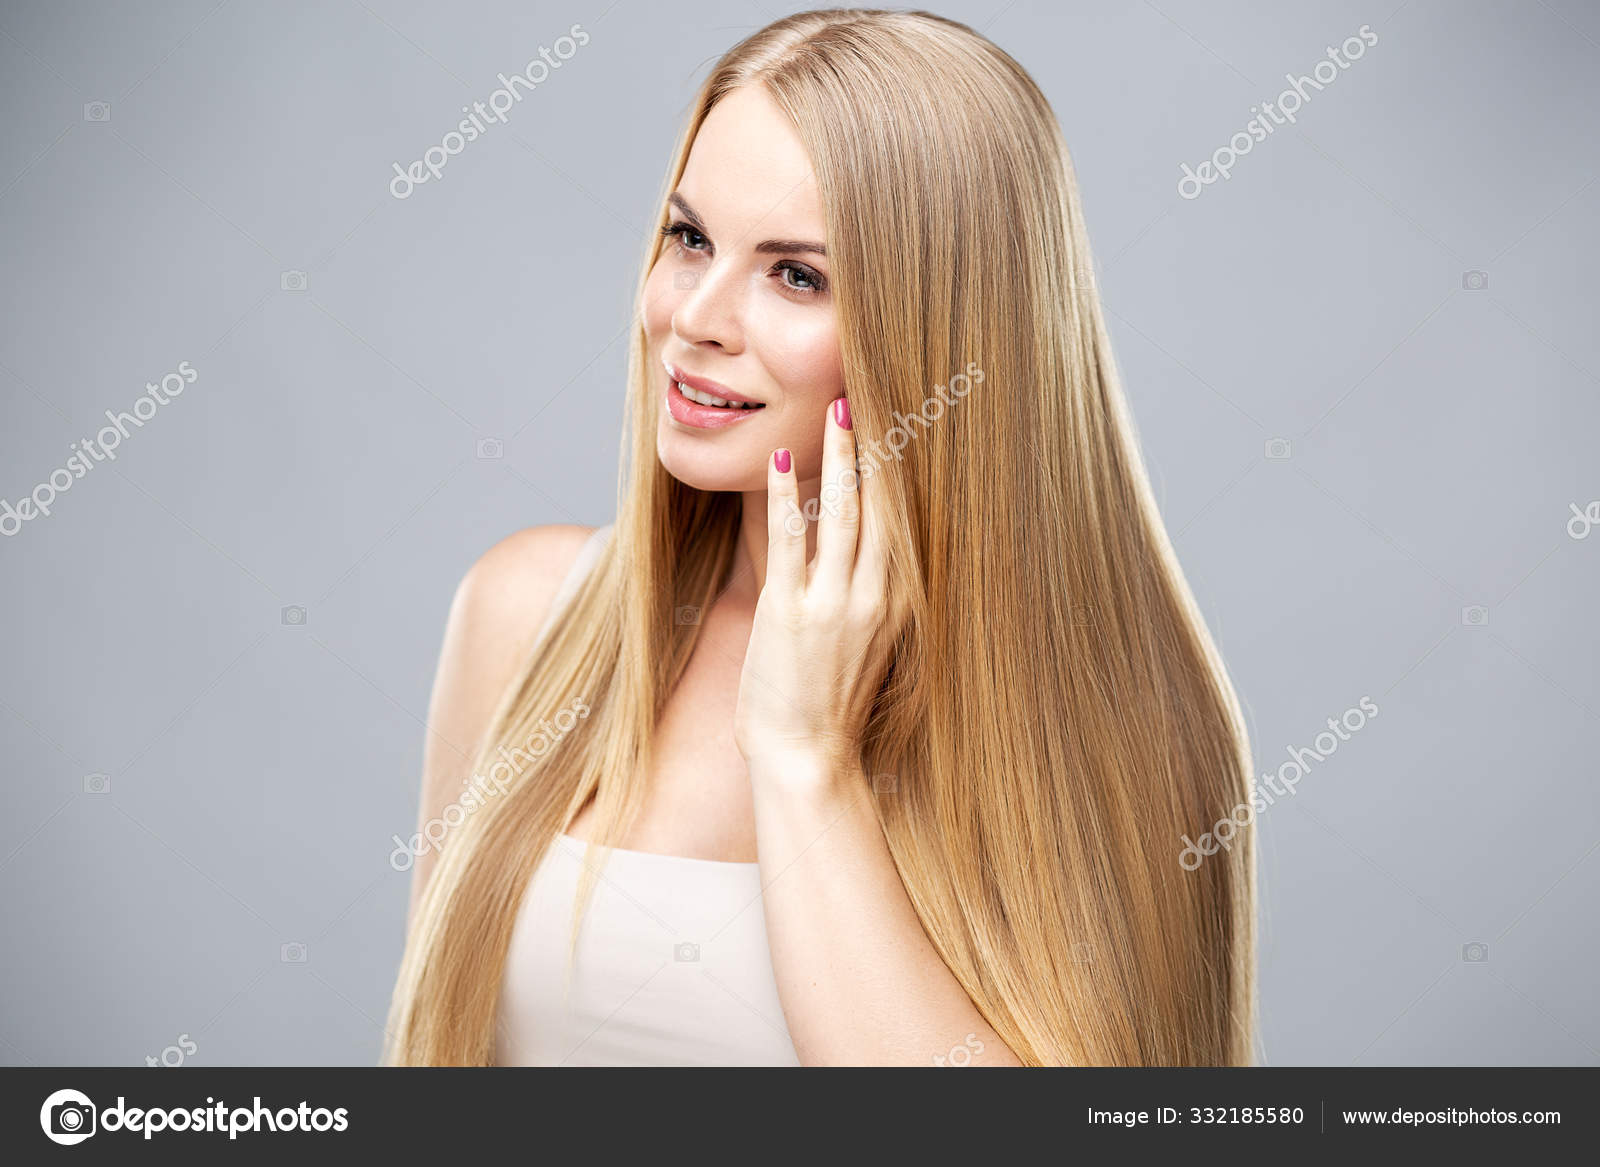 Cute girl with long straight blonde hair and healthy skin